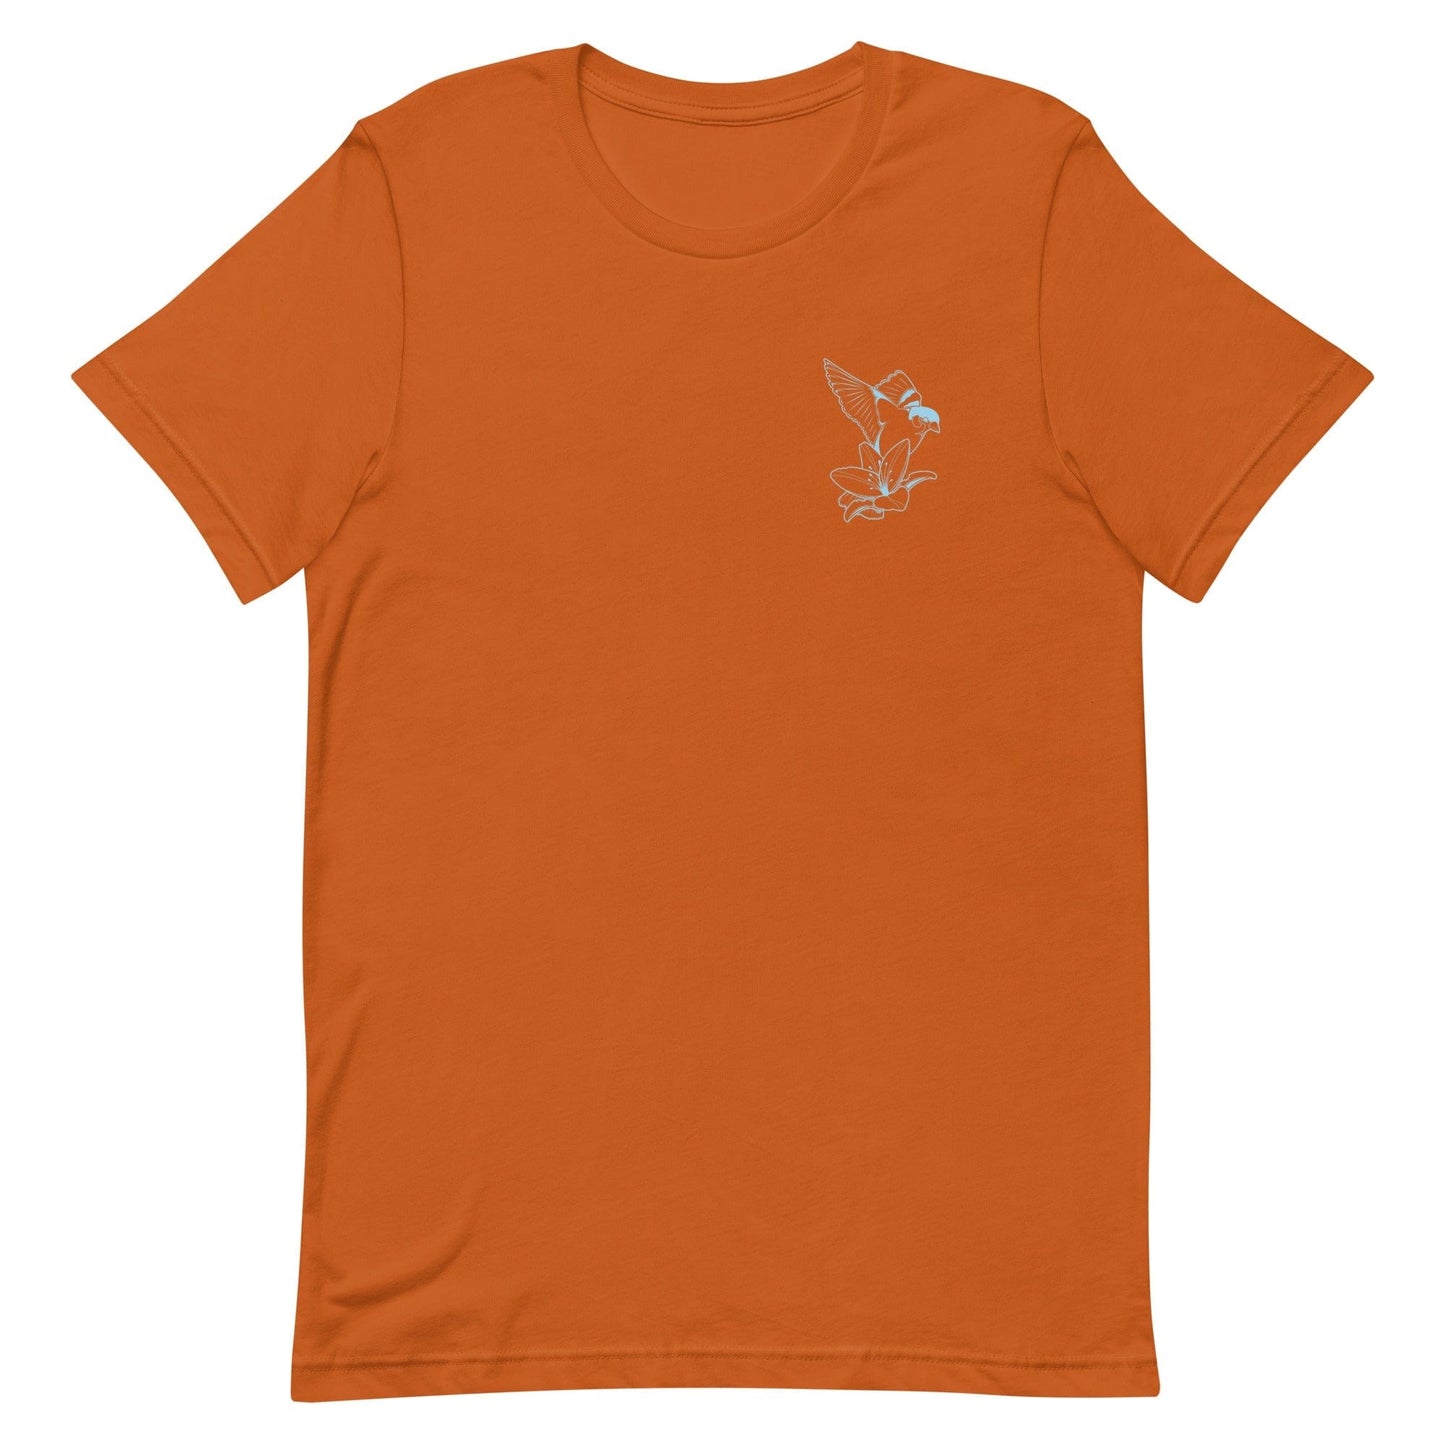 The SPARROW AND LILY Tee